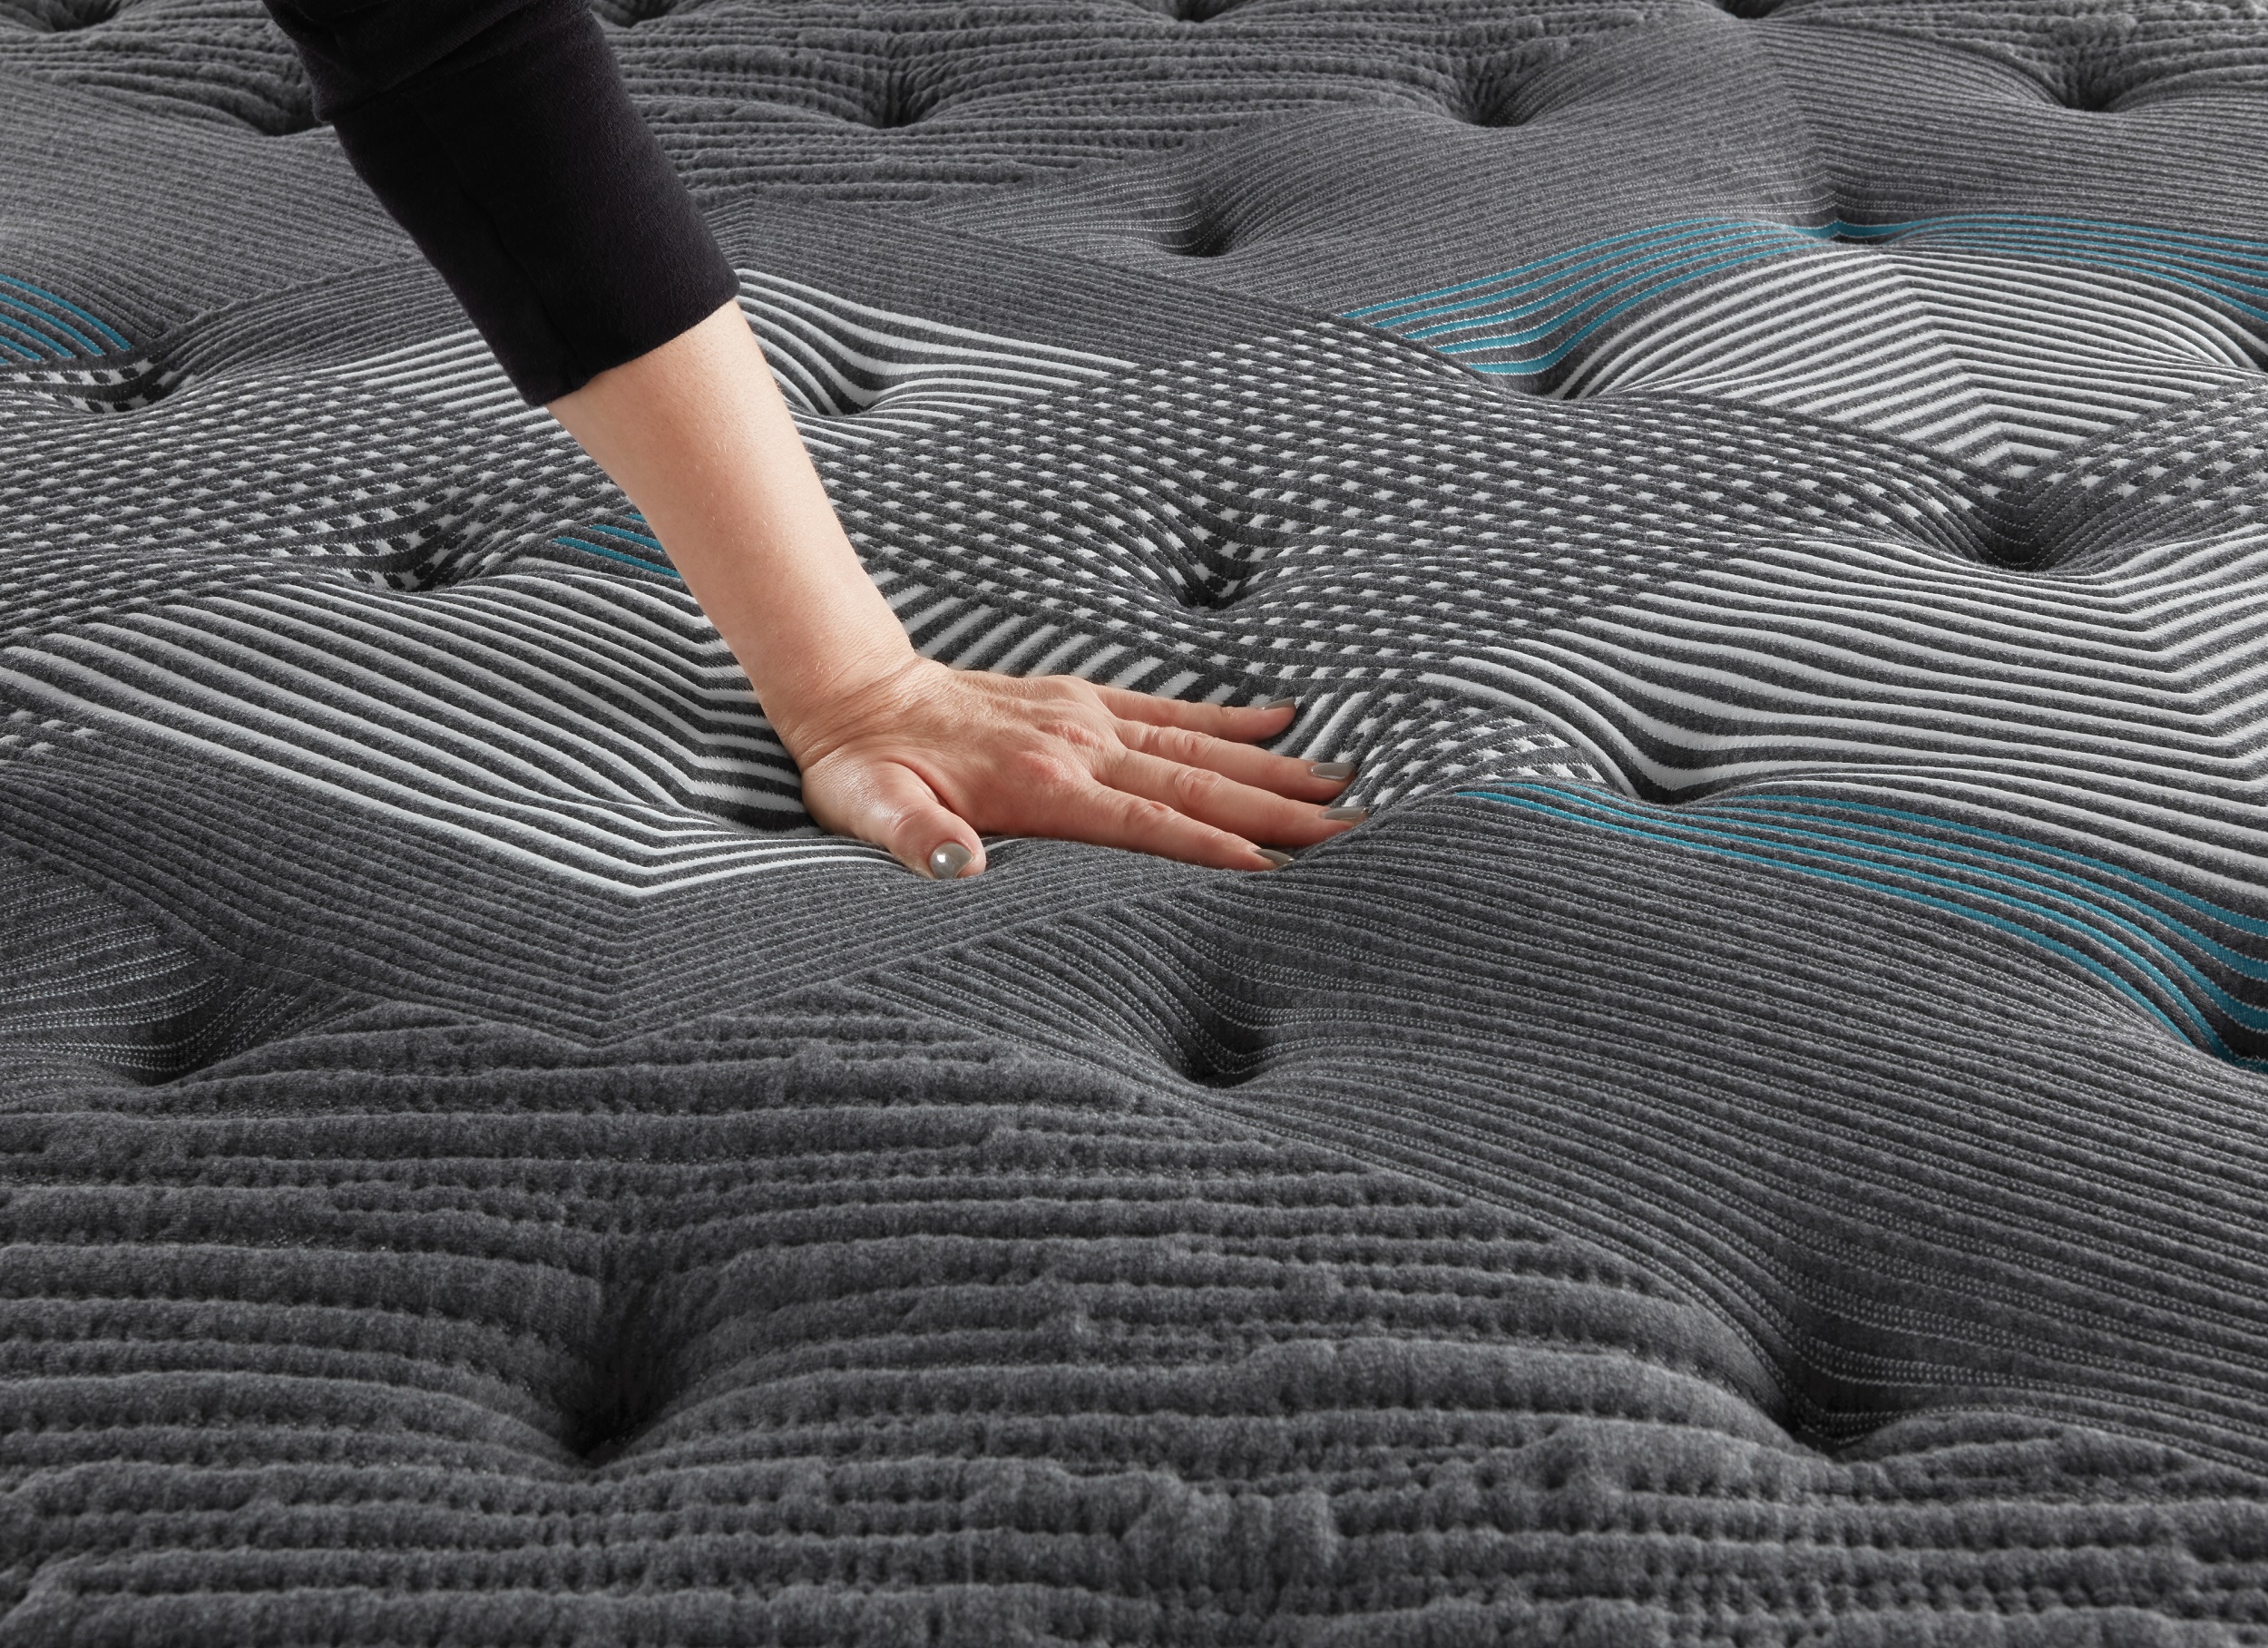 hand pushes down on Beautyrest Harmony Lux hybrid mattress surface